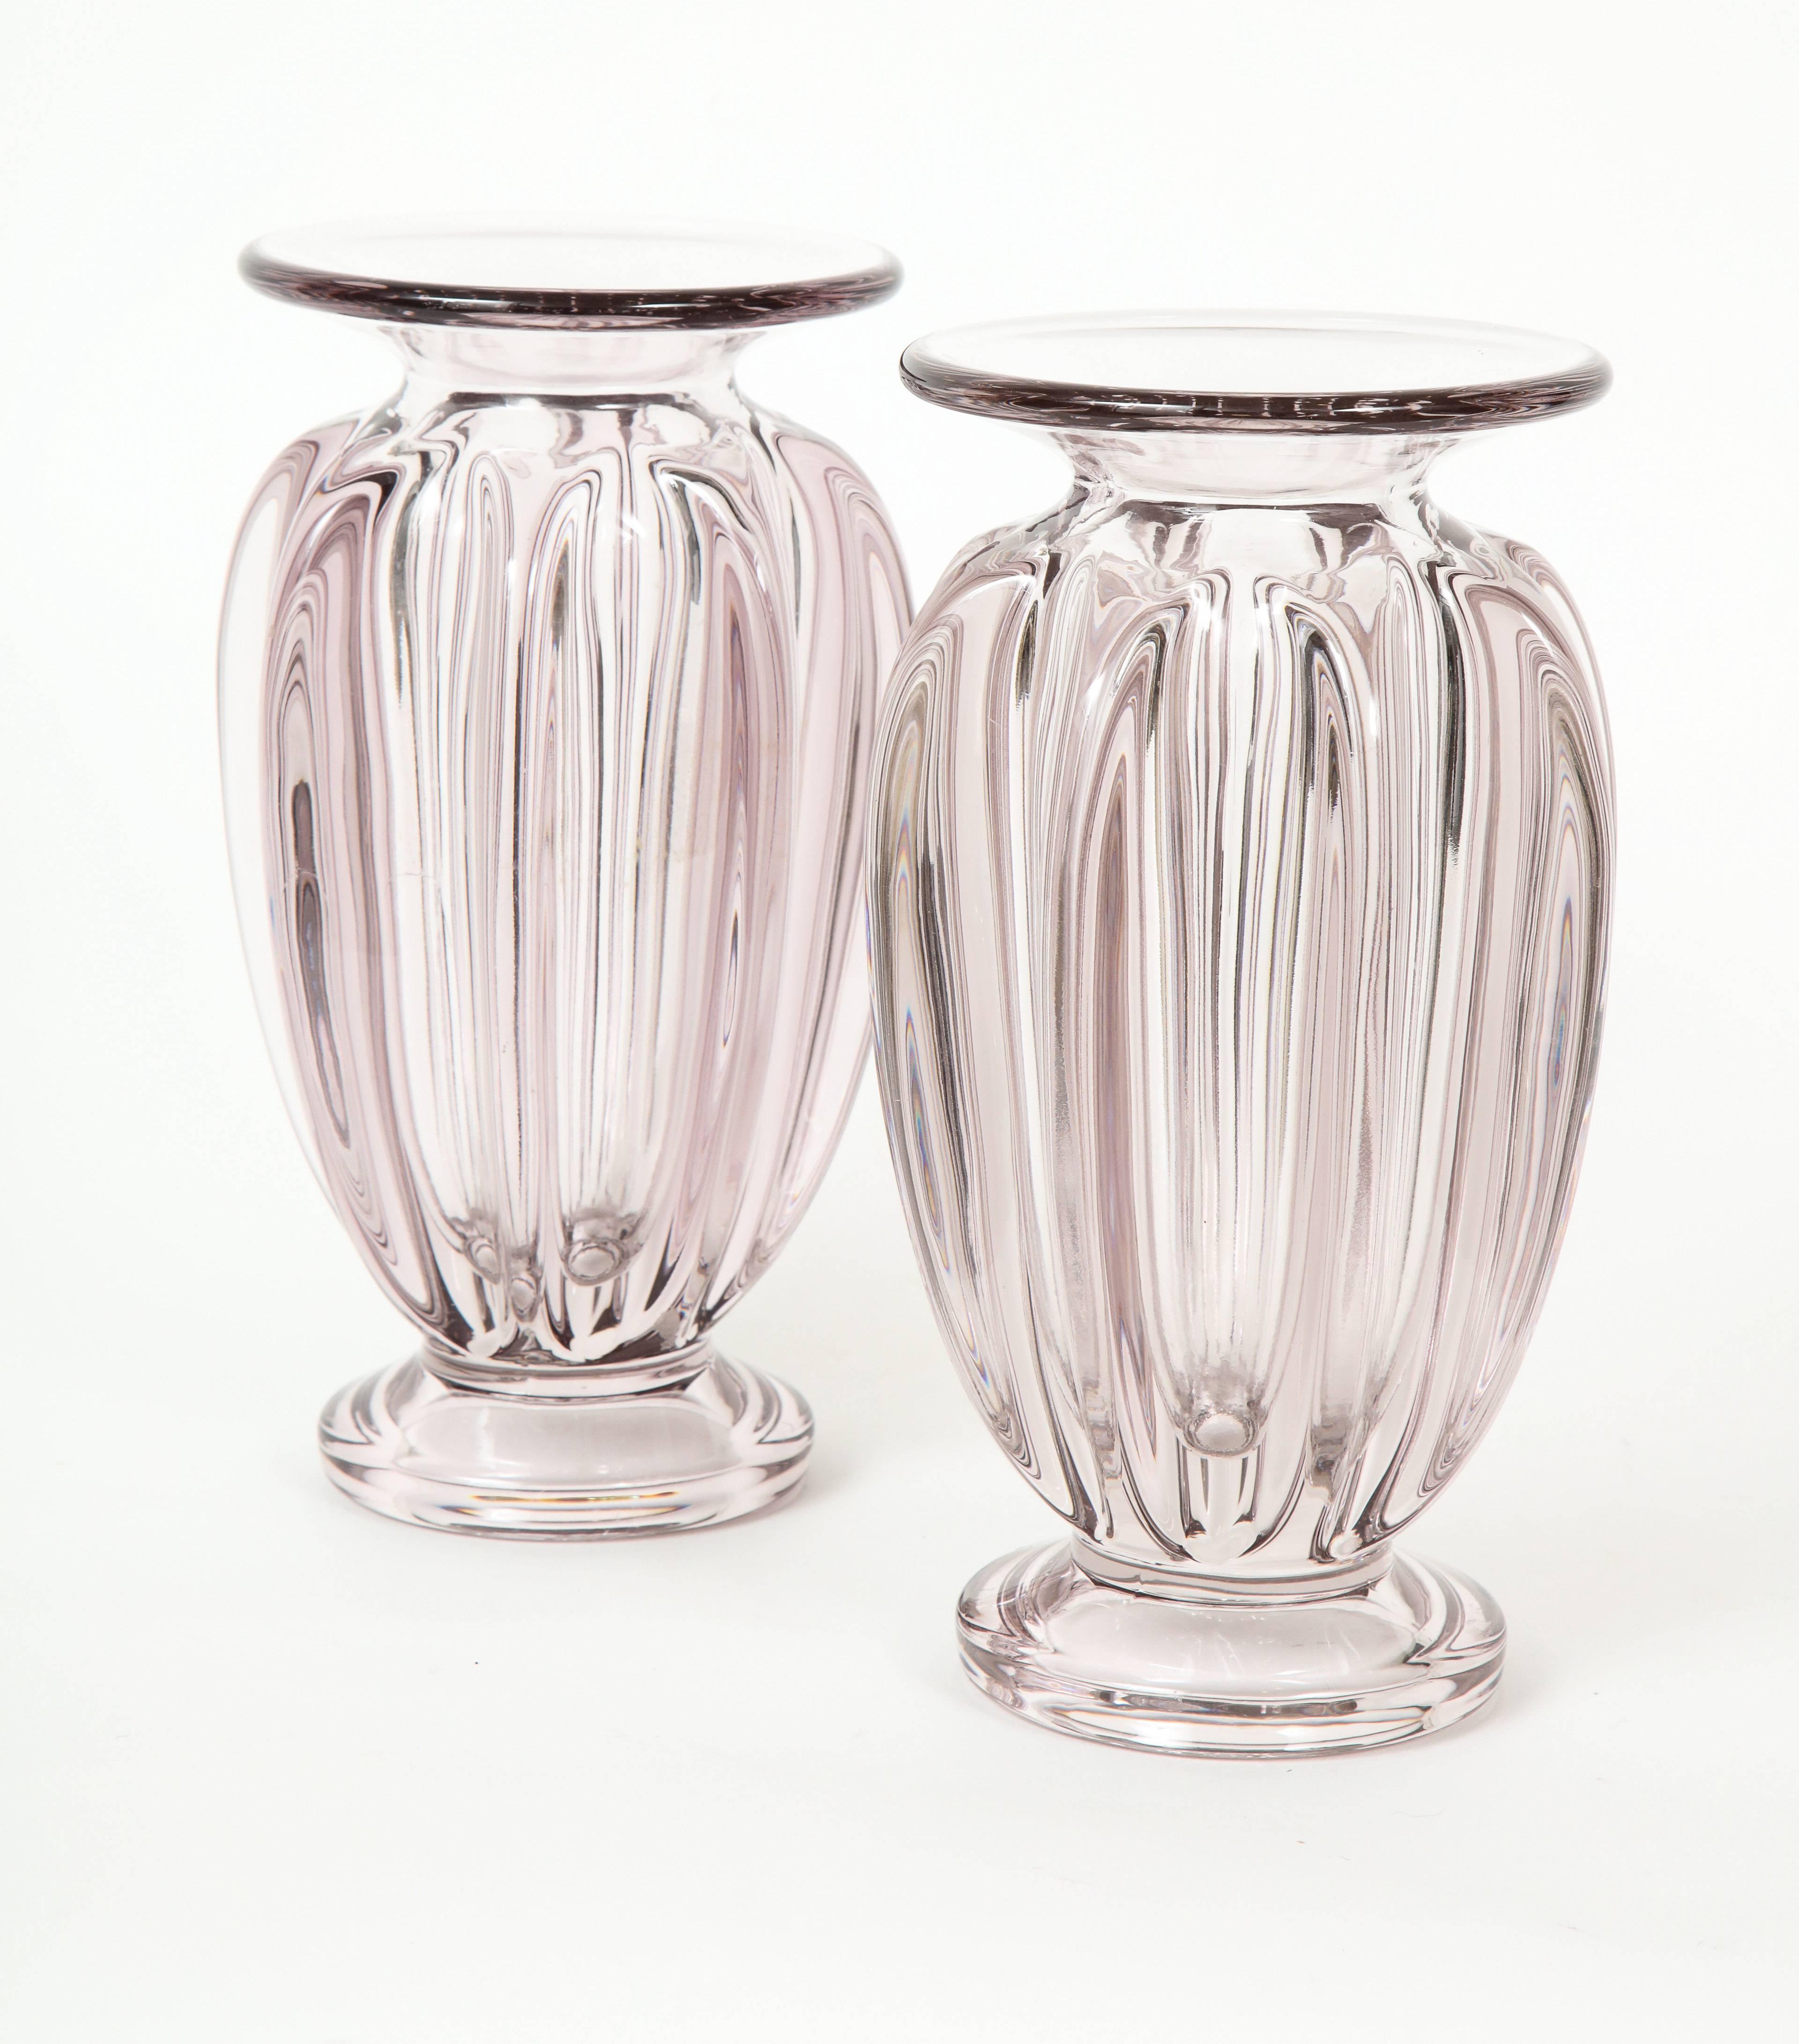 Stunning pair of D'Avesn French art glass vases, circa 1950s. This great pair is a unique shade of grey with a hint of lavender. Stunning design and weight make these very decorative with a very 1950s quality to them. Unsigned. 